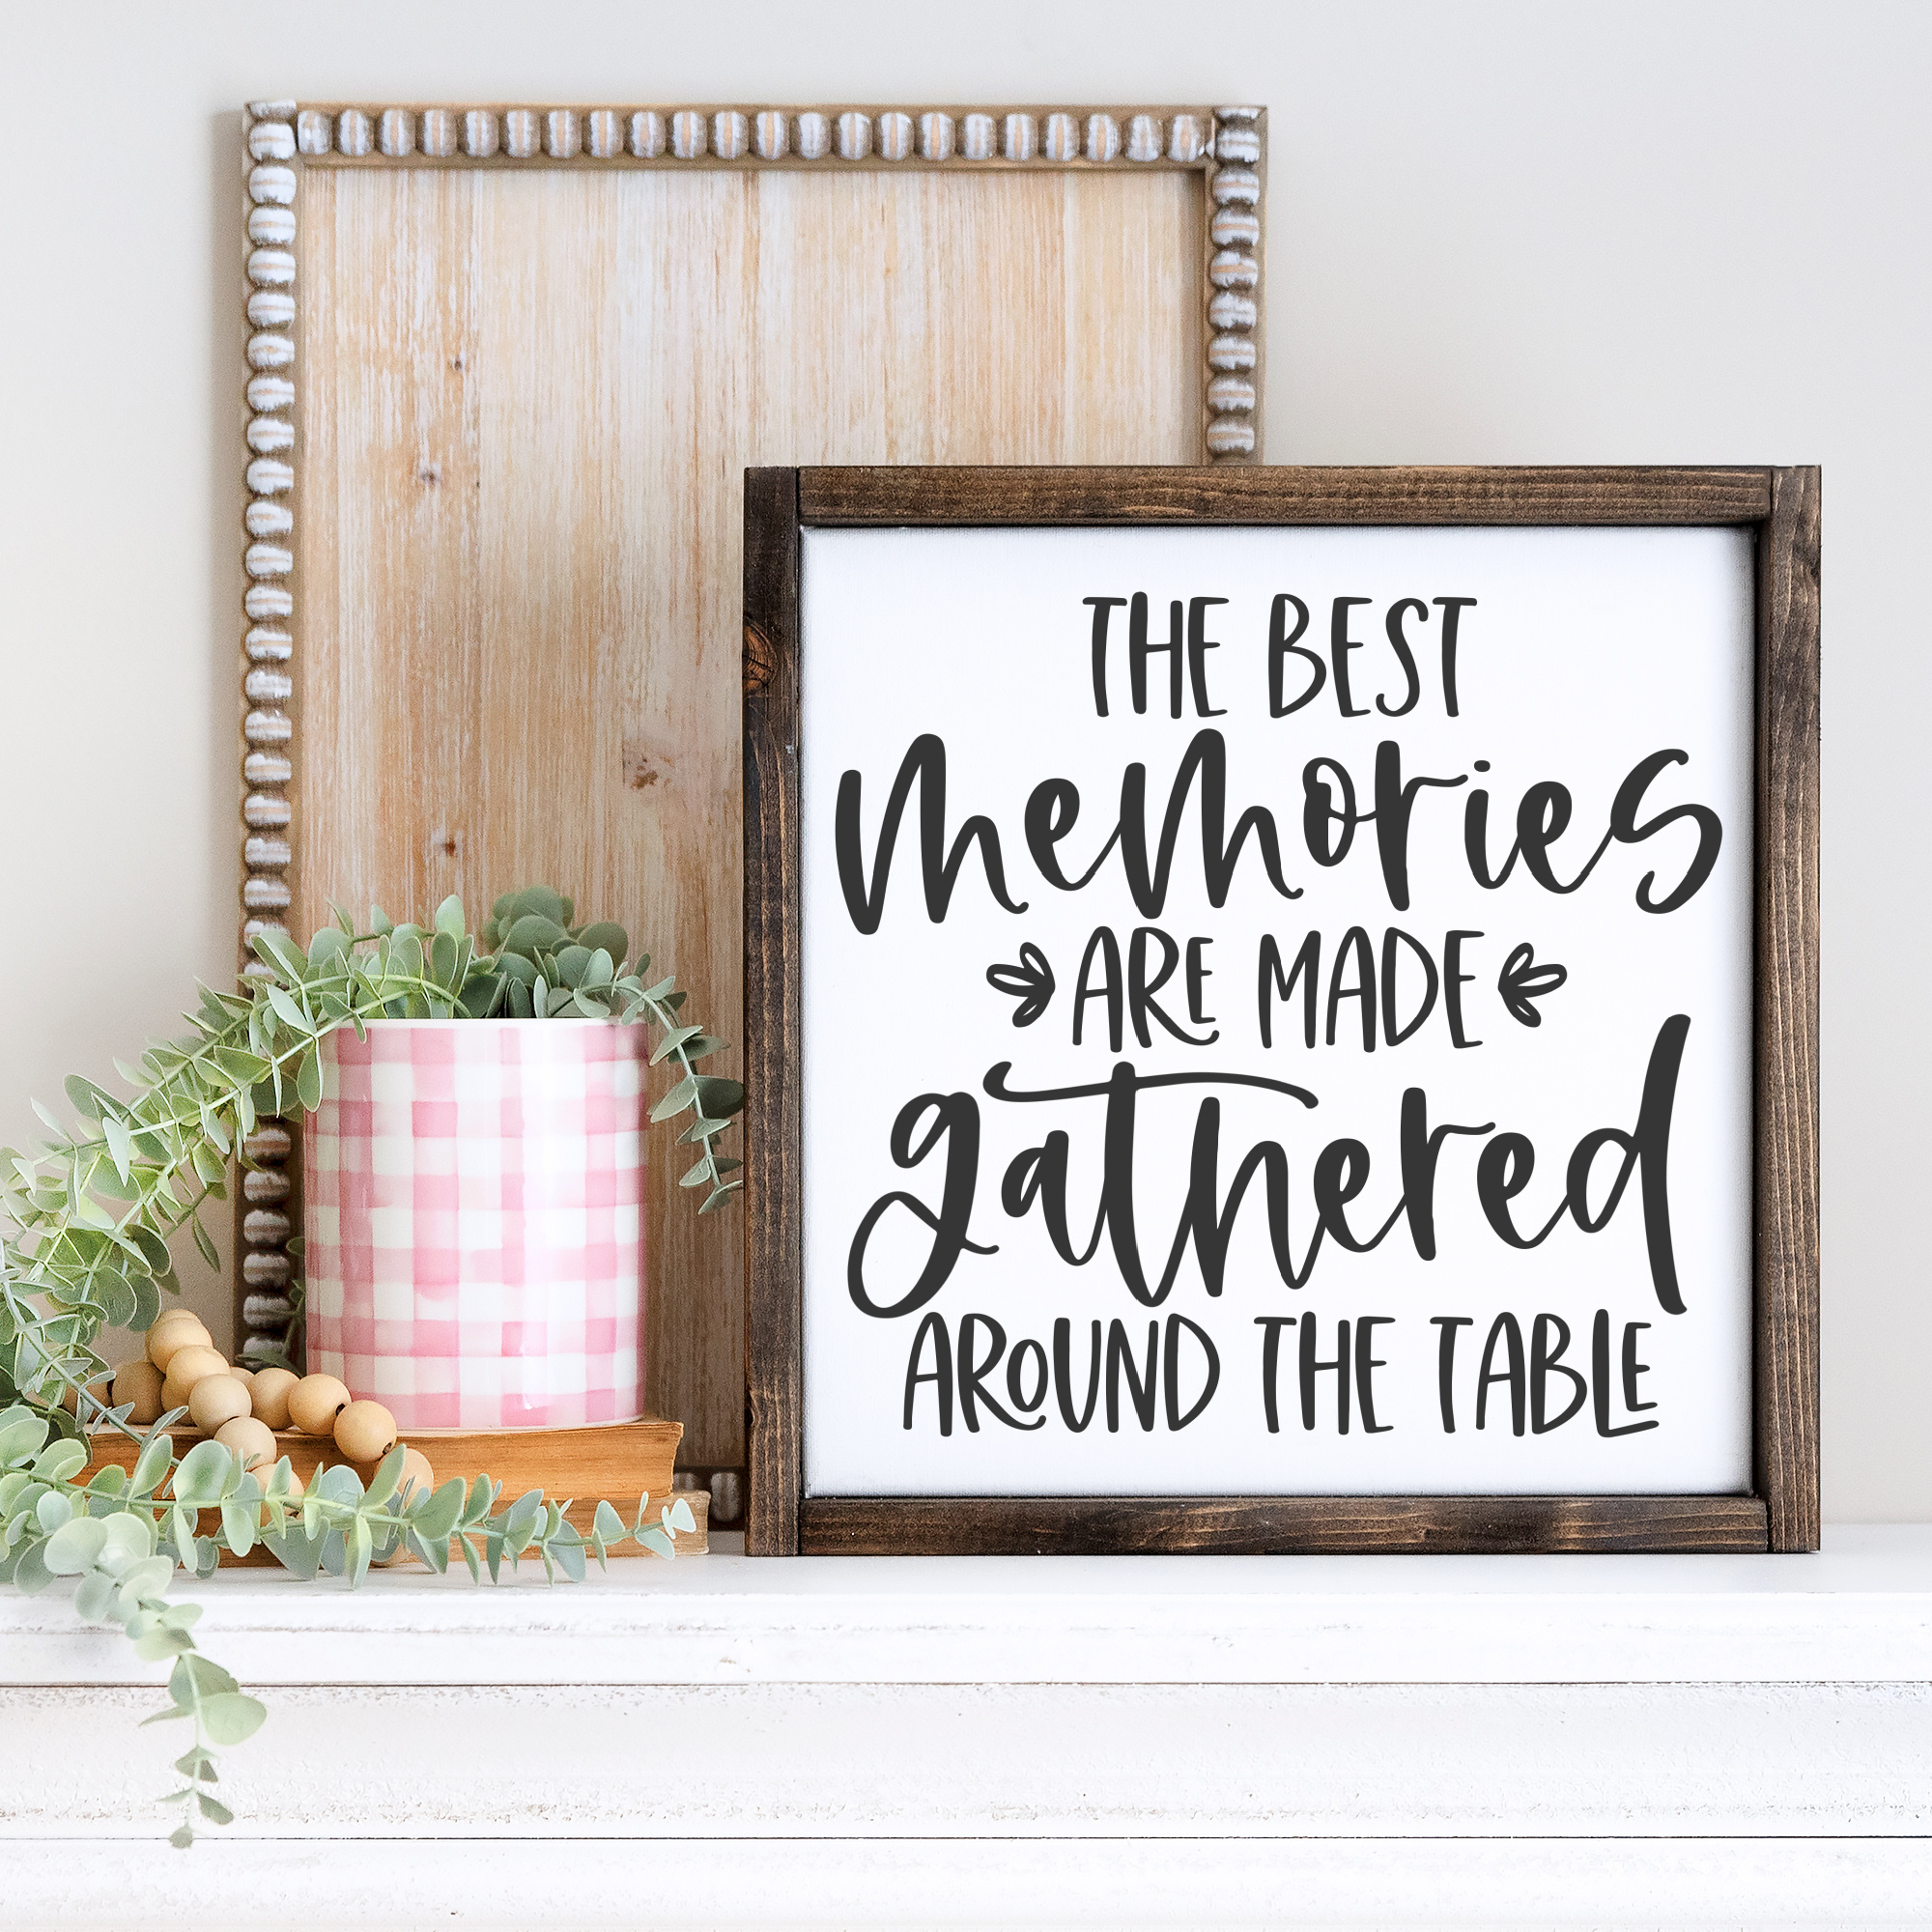 The Best Memories Are Made Gathered Around the Table SVG - This fun and free SVG cut file is perfect for your kitchen and dining room!